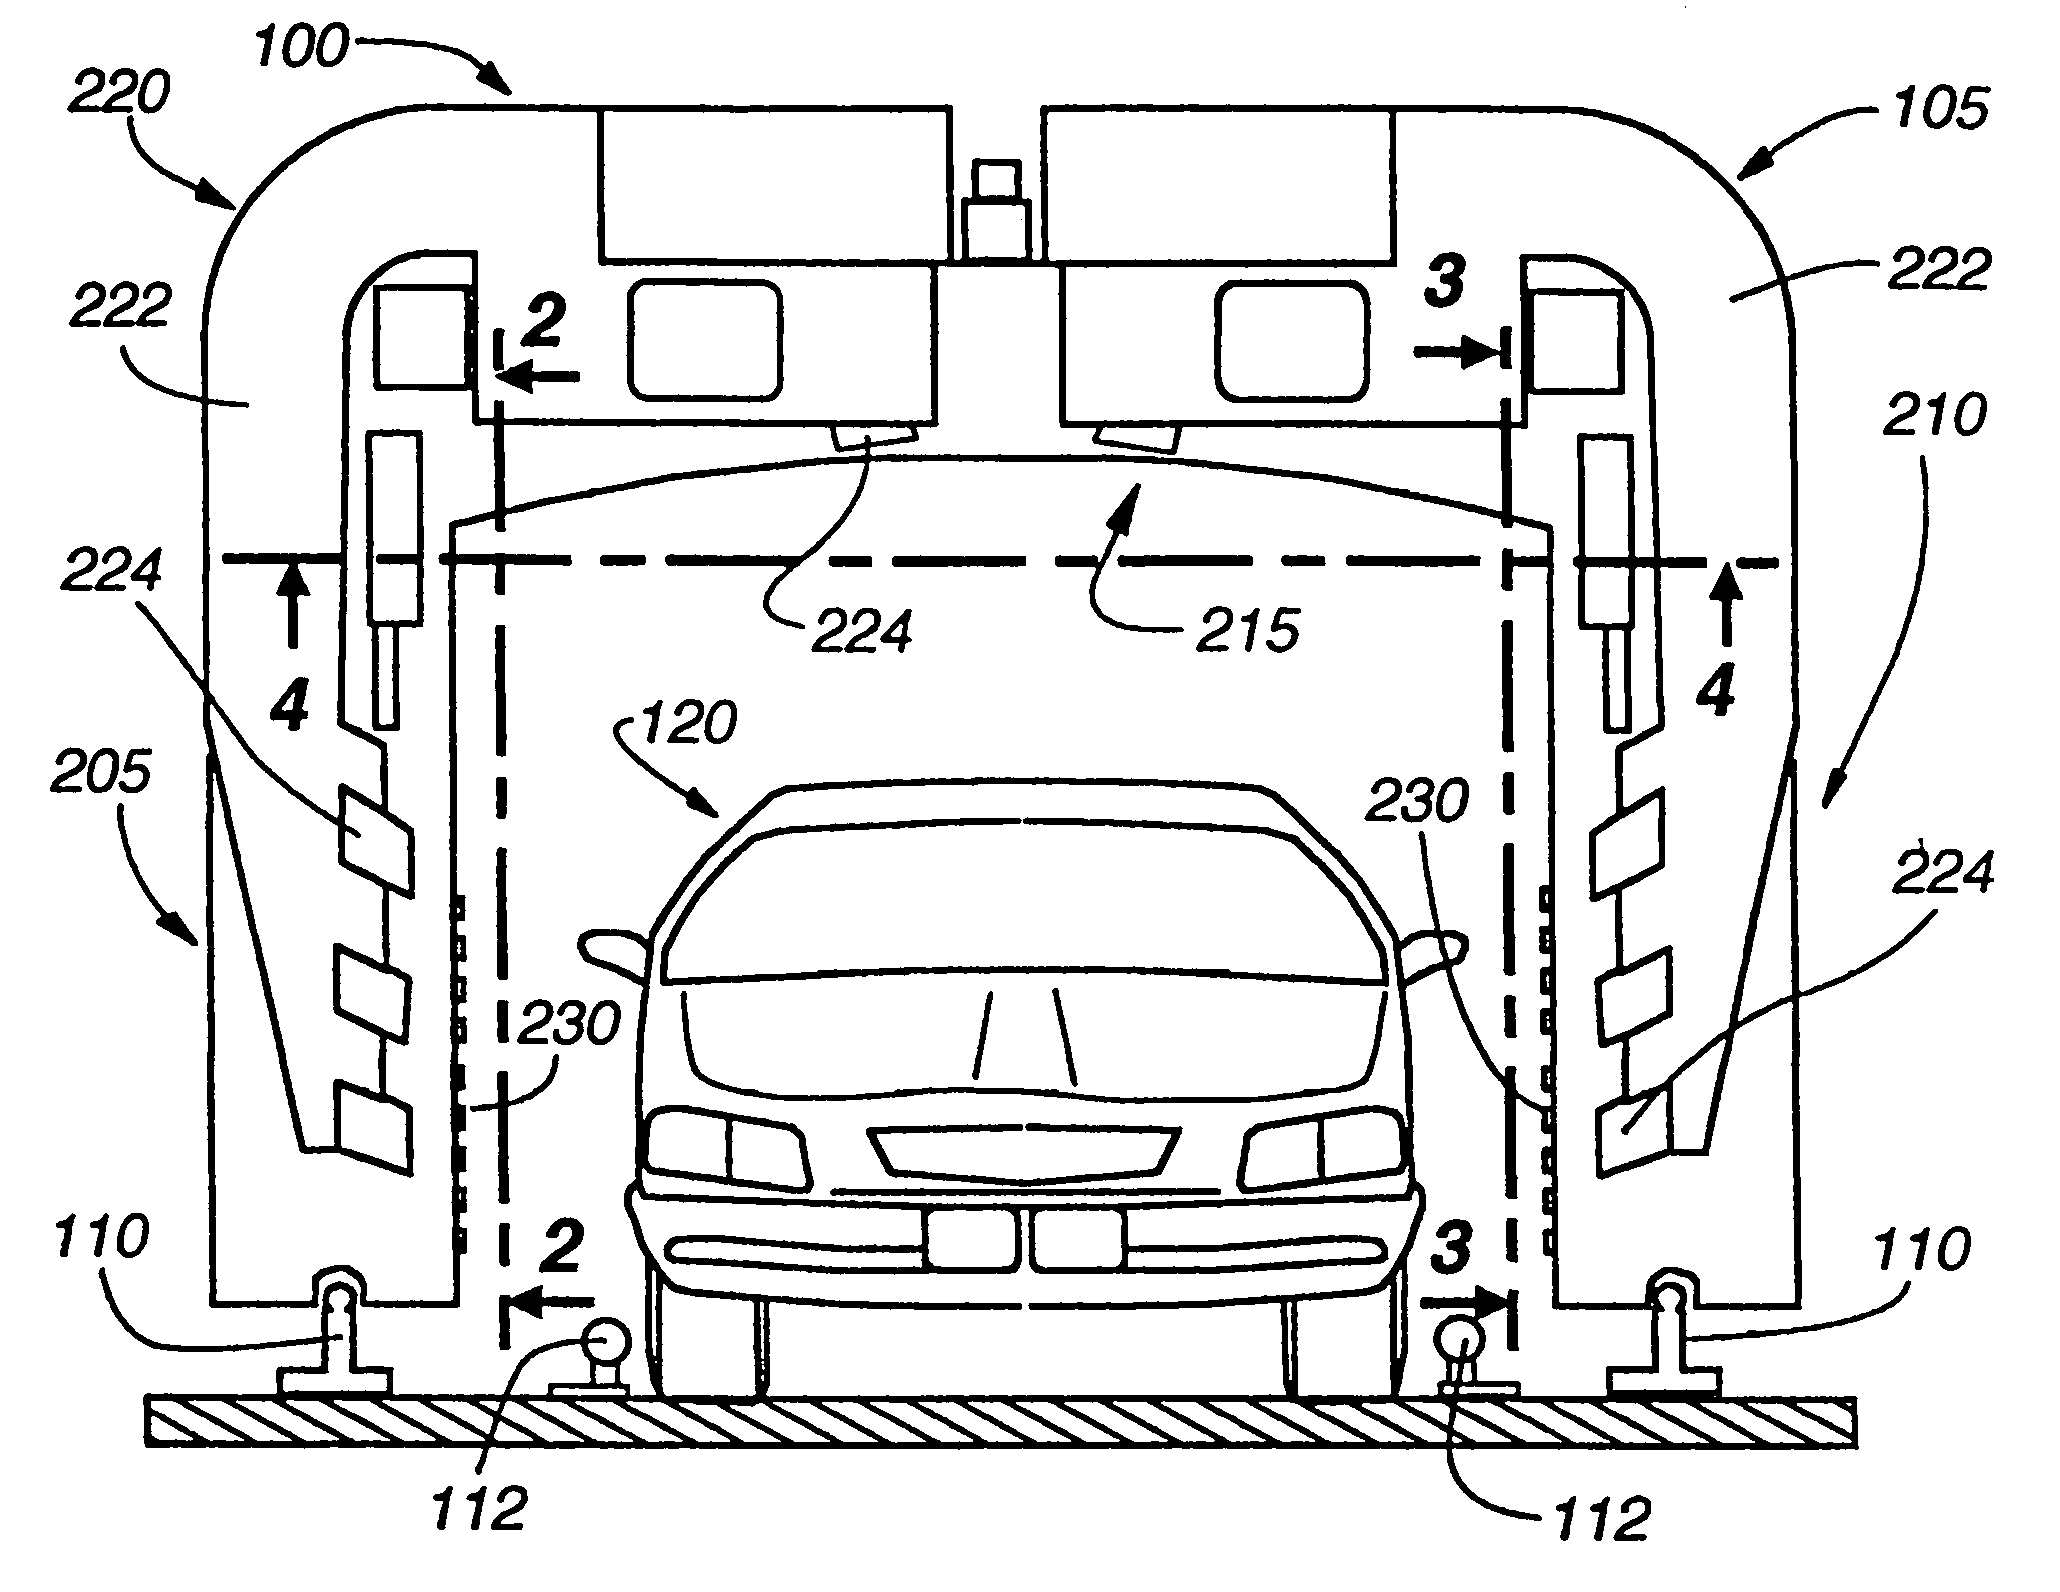 Vehicle wash apparatus with an adjustable boom